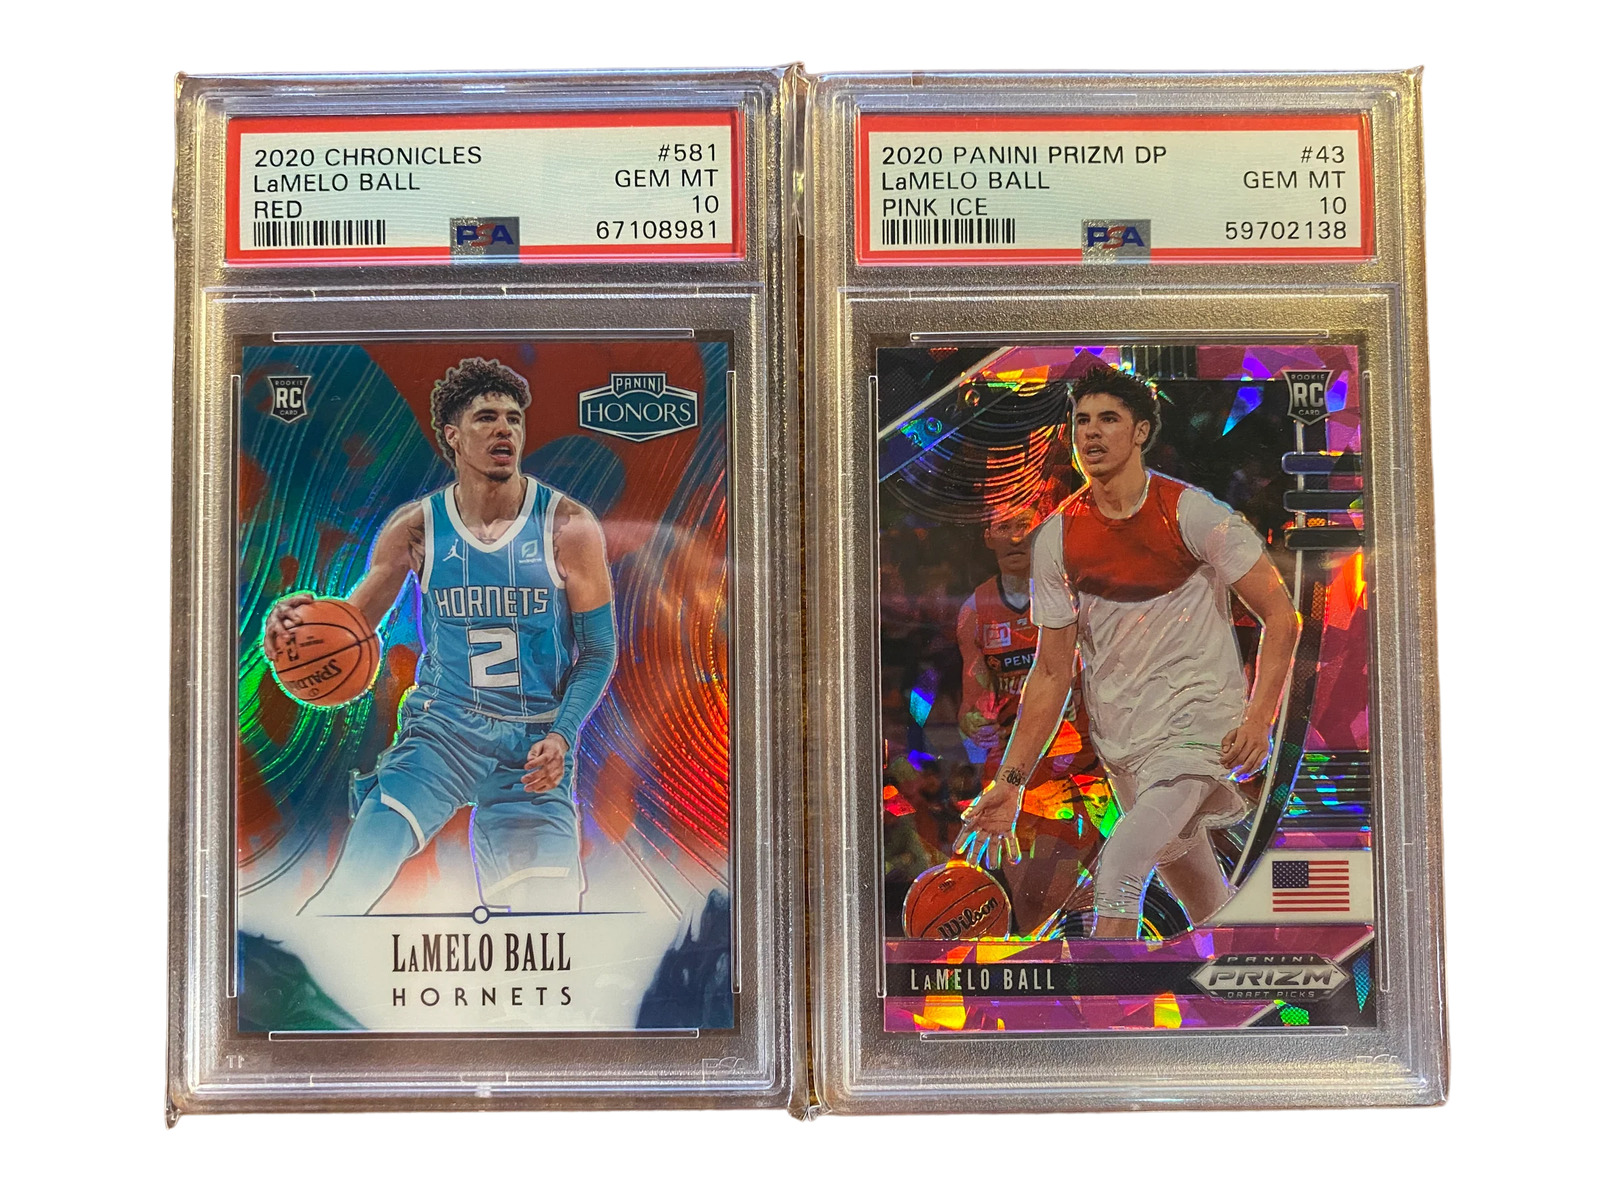 (2) LaMelo Ball Chronicles Honors Red /149 + Prizm DP Pink Ice PSA 10